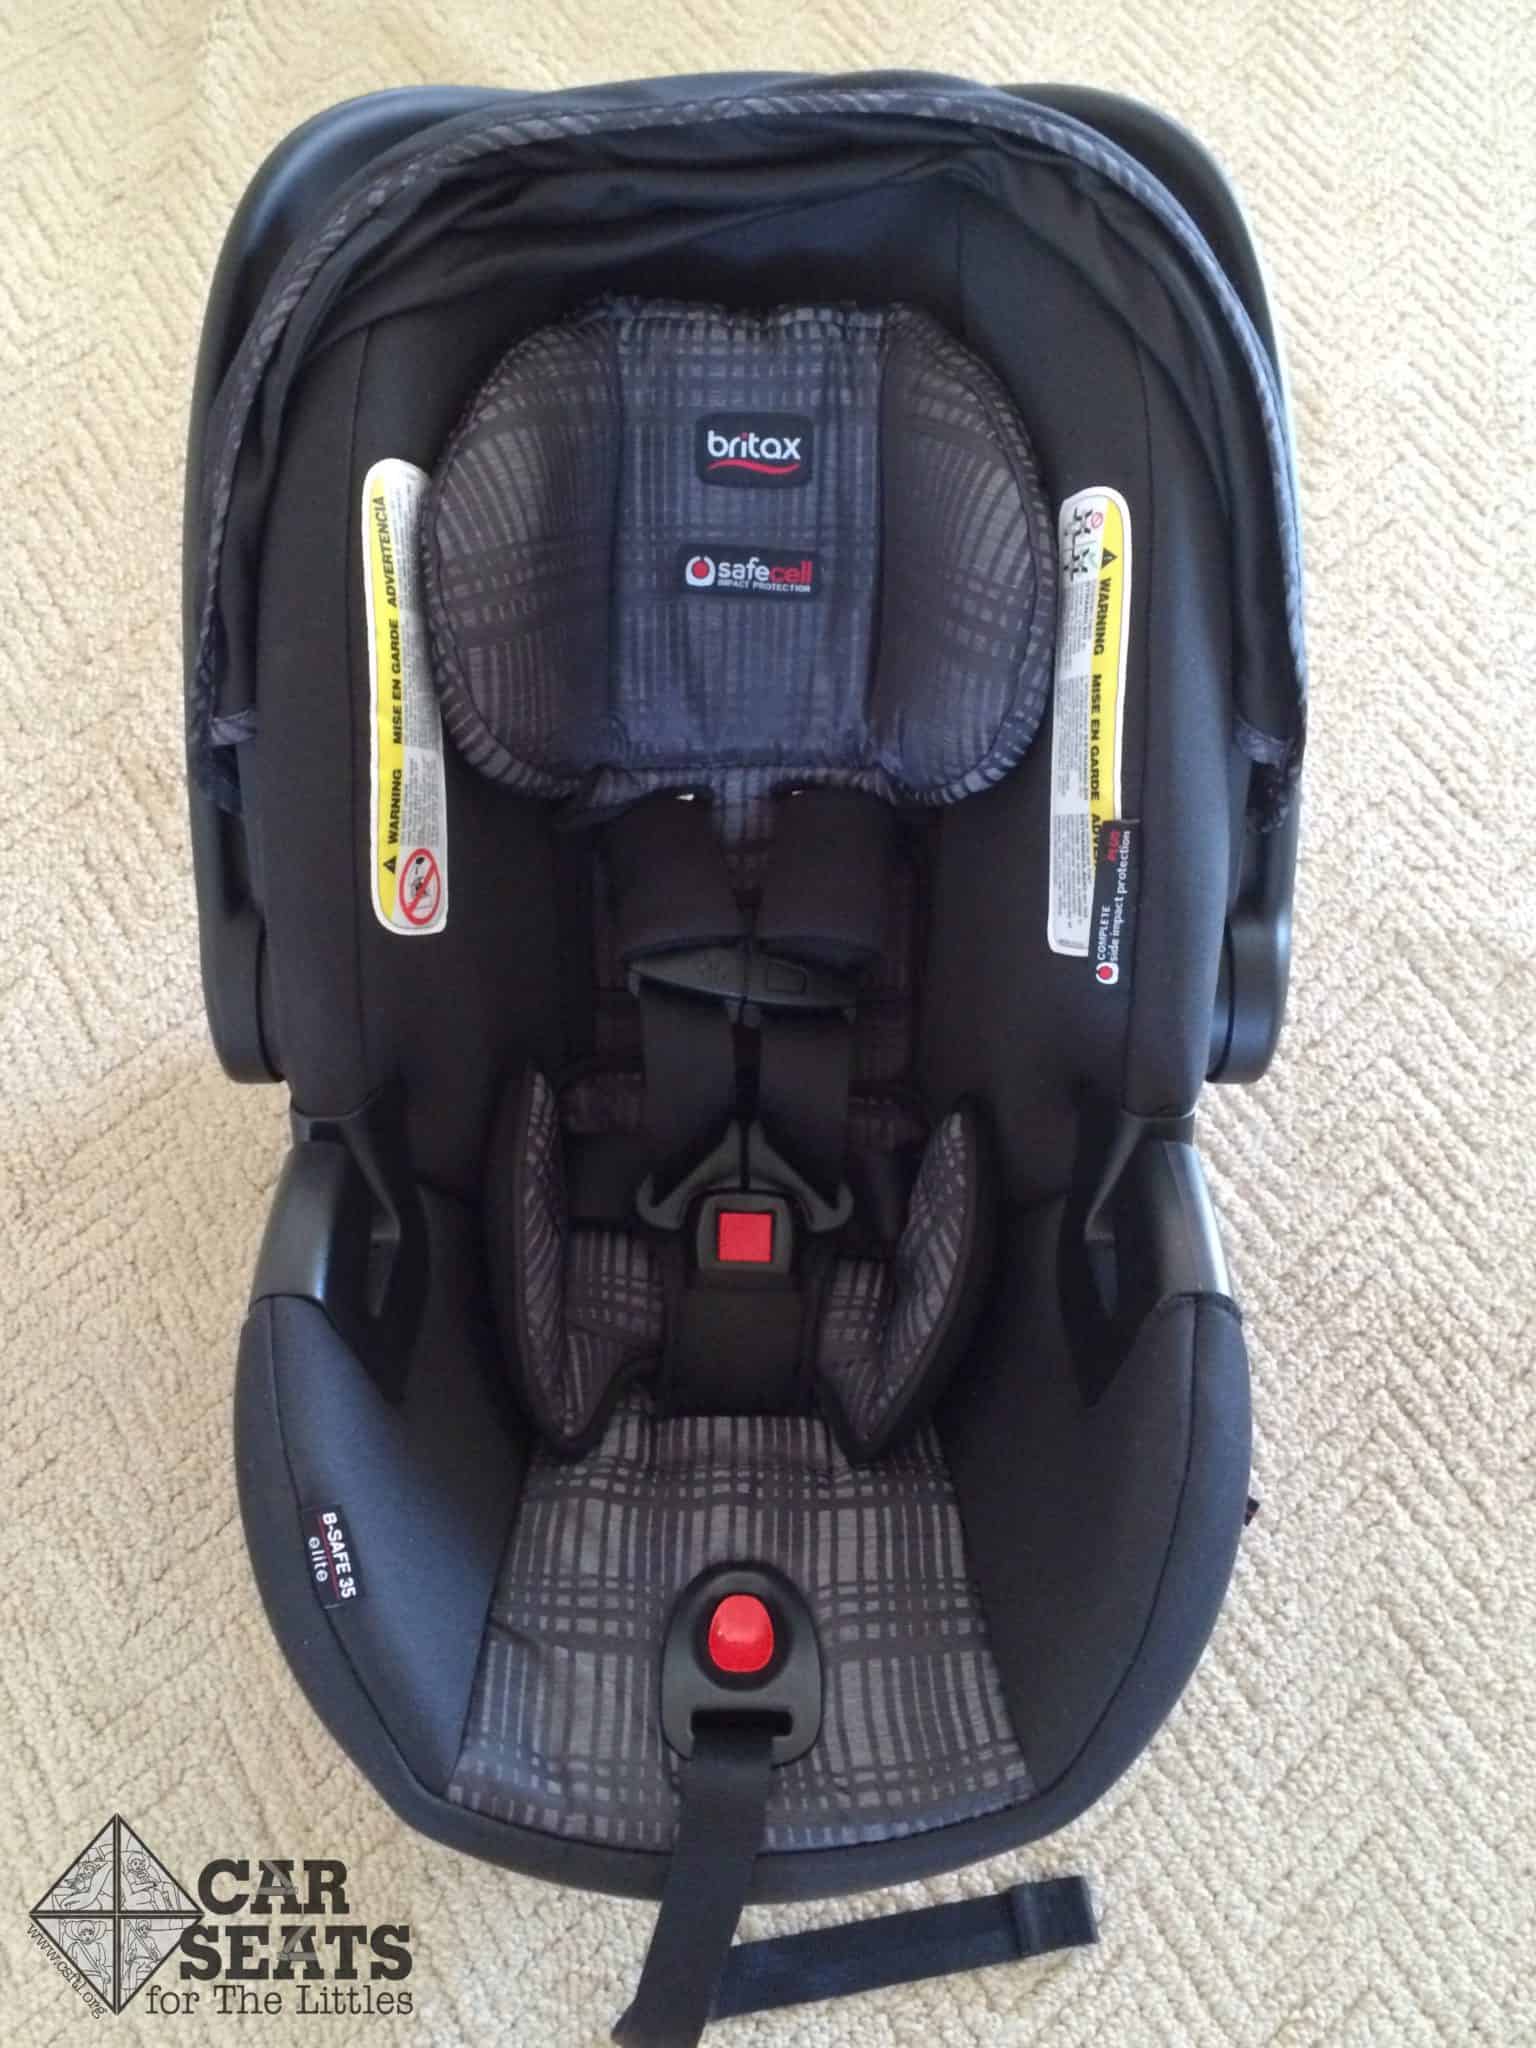 Britax B Safe 35 Elite Review Car Seats For The Littles - Britax B Safe Car Seat Assembly